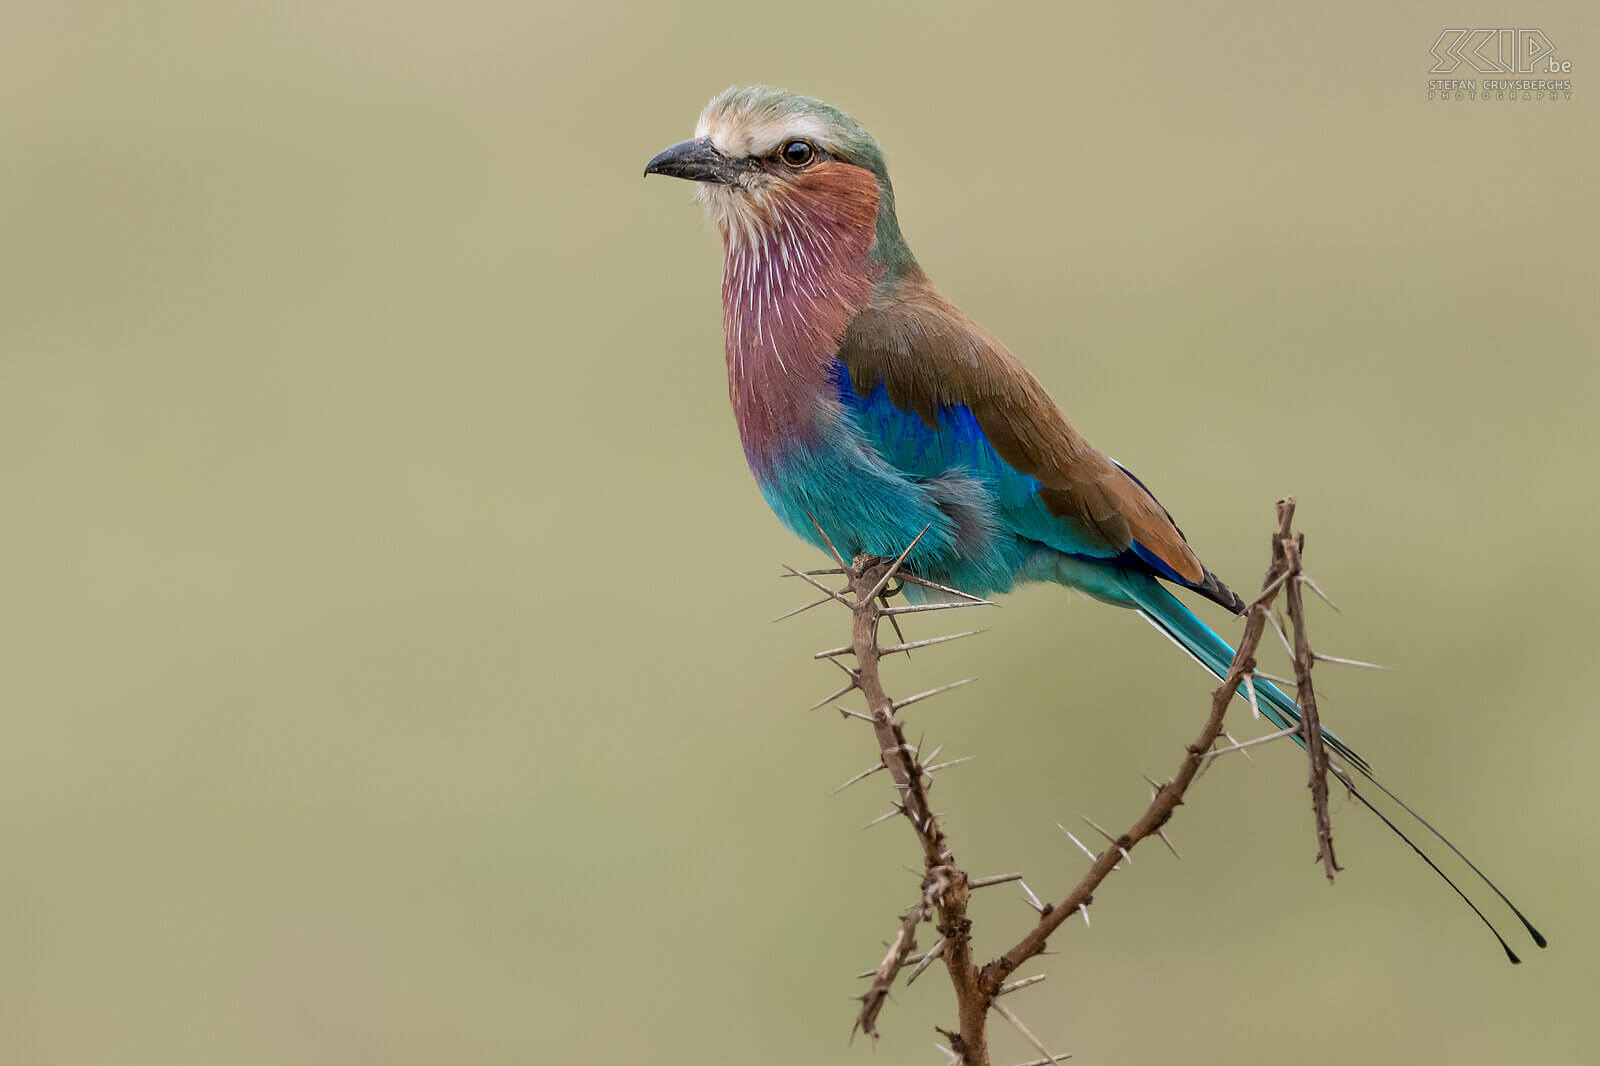 Nakuru NP - Lilac-breasted roller The lilac-breasted roller (Coracias caudatus) is a common but beautiful bird that can be mostly seen at the tops of trees from where it can spot insects, lizards, snails, small birds and rodents at the ground. Stefan Cruysberghs